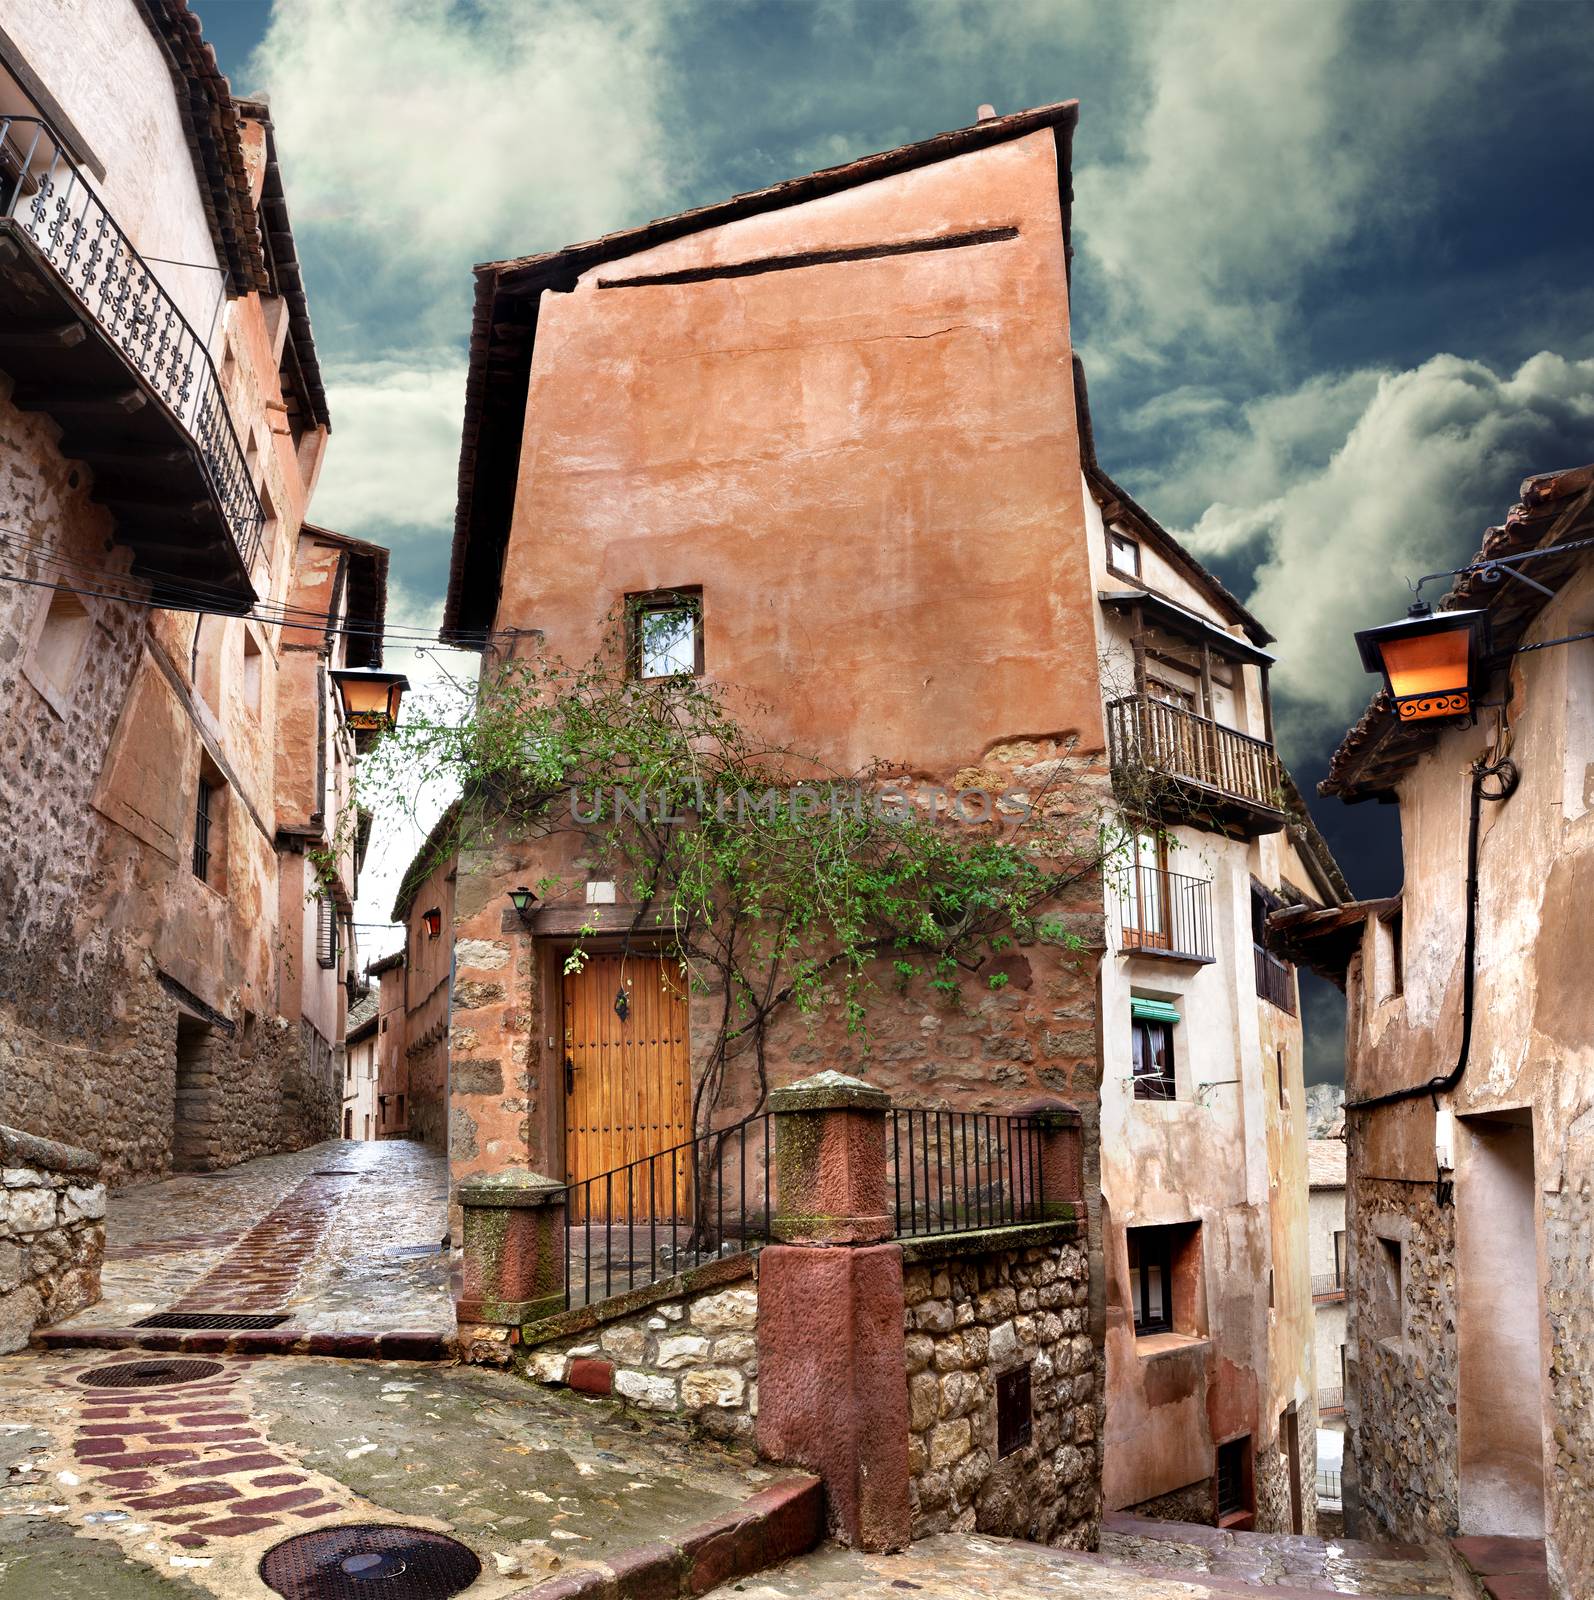 Surreal house and cobblestone village street at evening